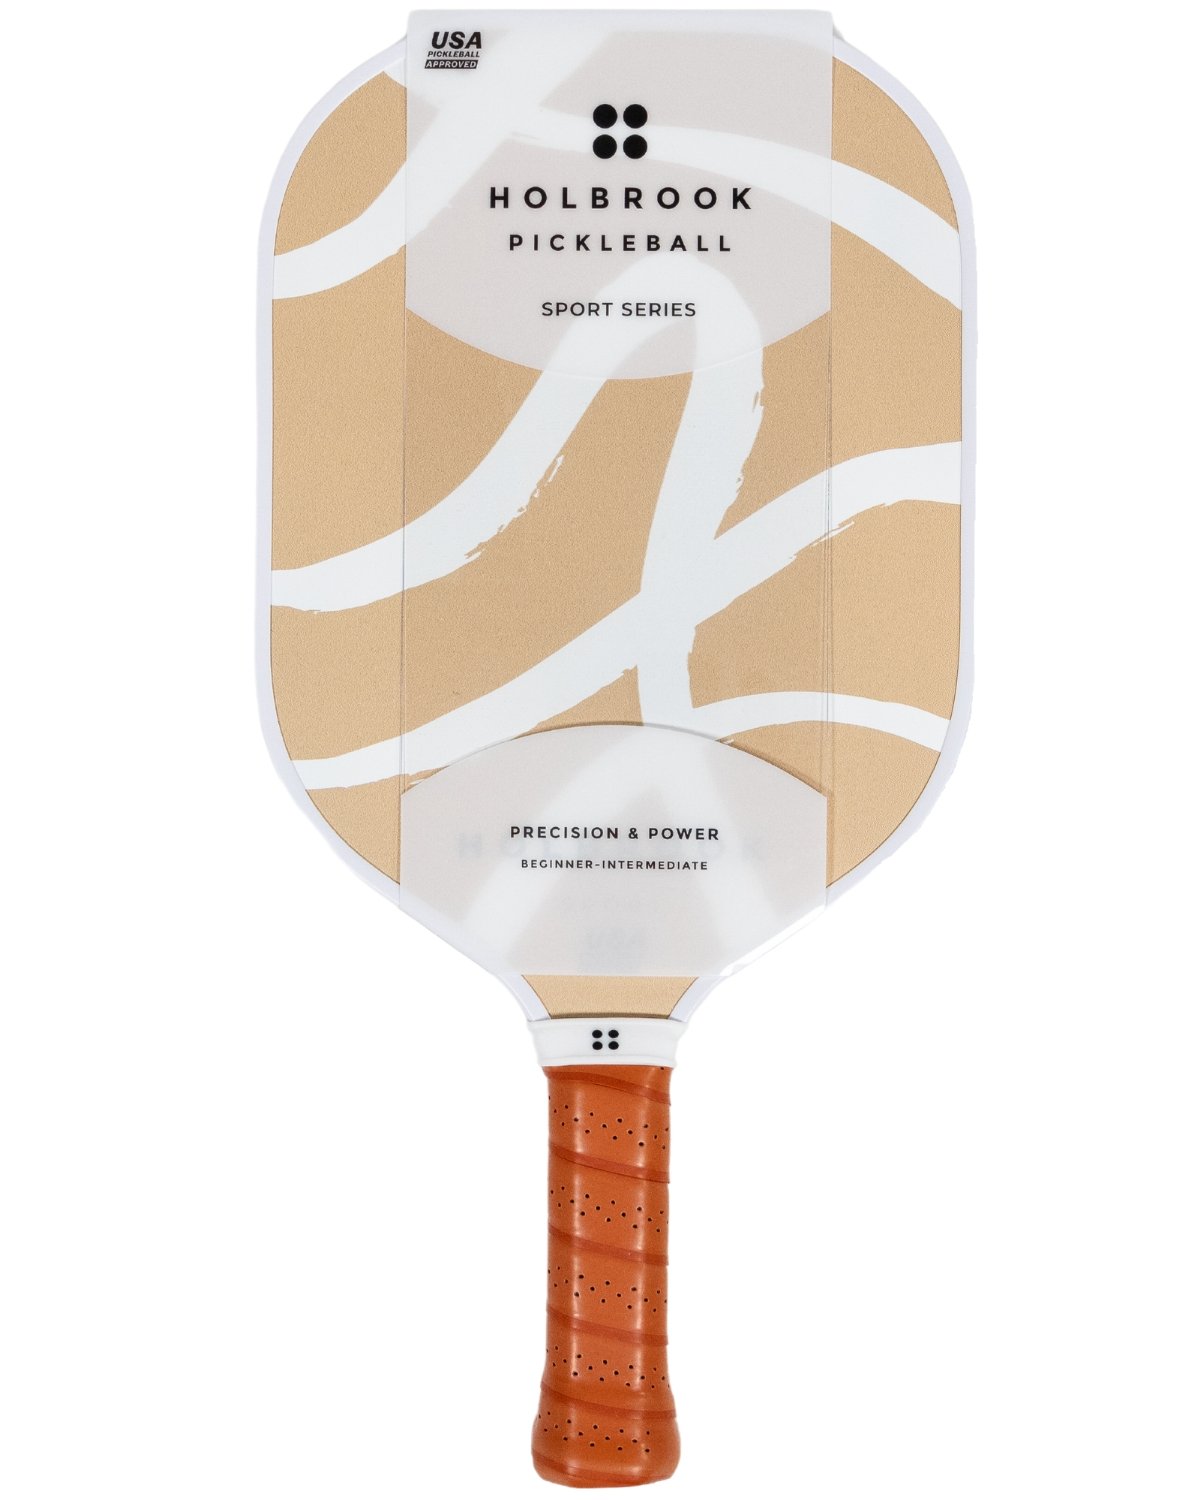 Dune by Holbrook Pickleball package